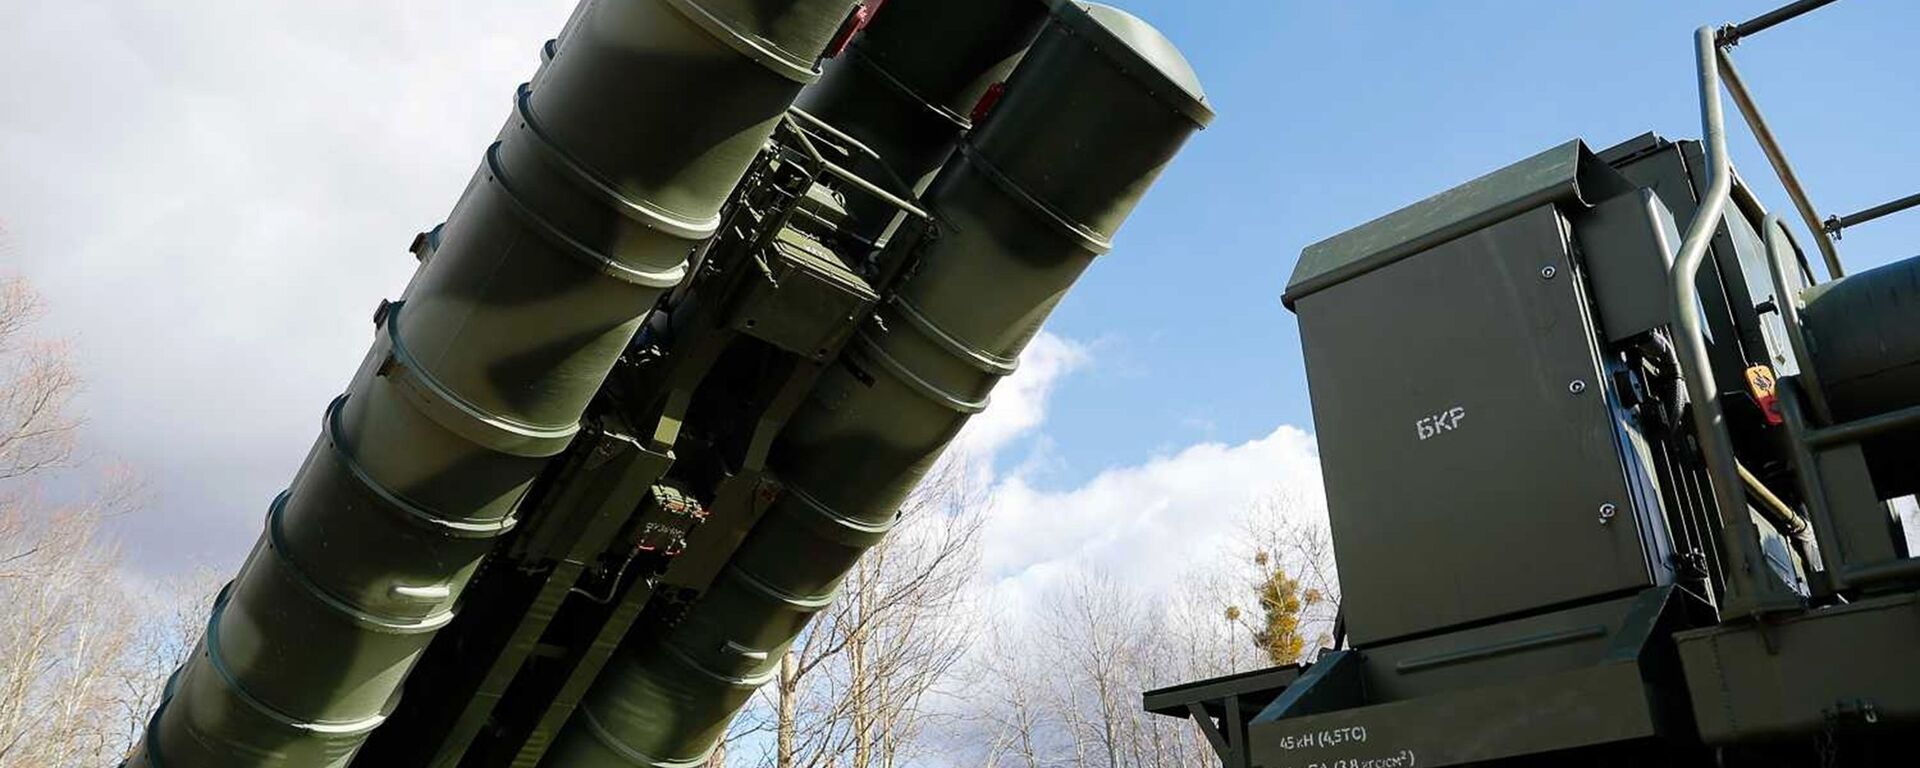 The latest S-400 Triumph anti-aircraft missile systems, which entered service with the Baltic Fleet air defense system in the Kaliningrad Region - Sputnik International, 1920, 11.01.2021